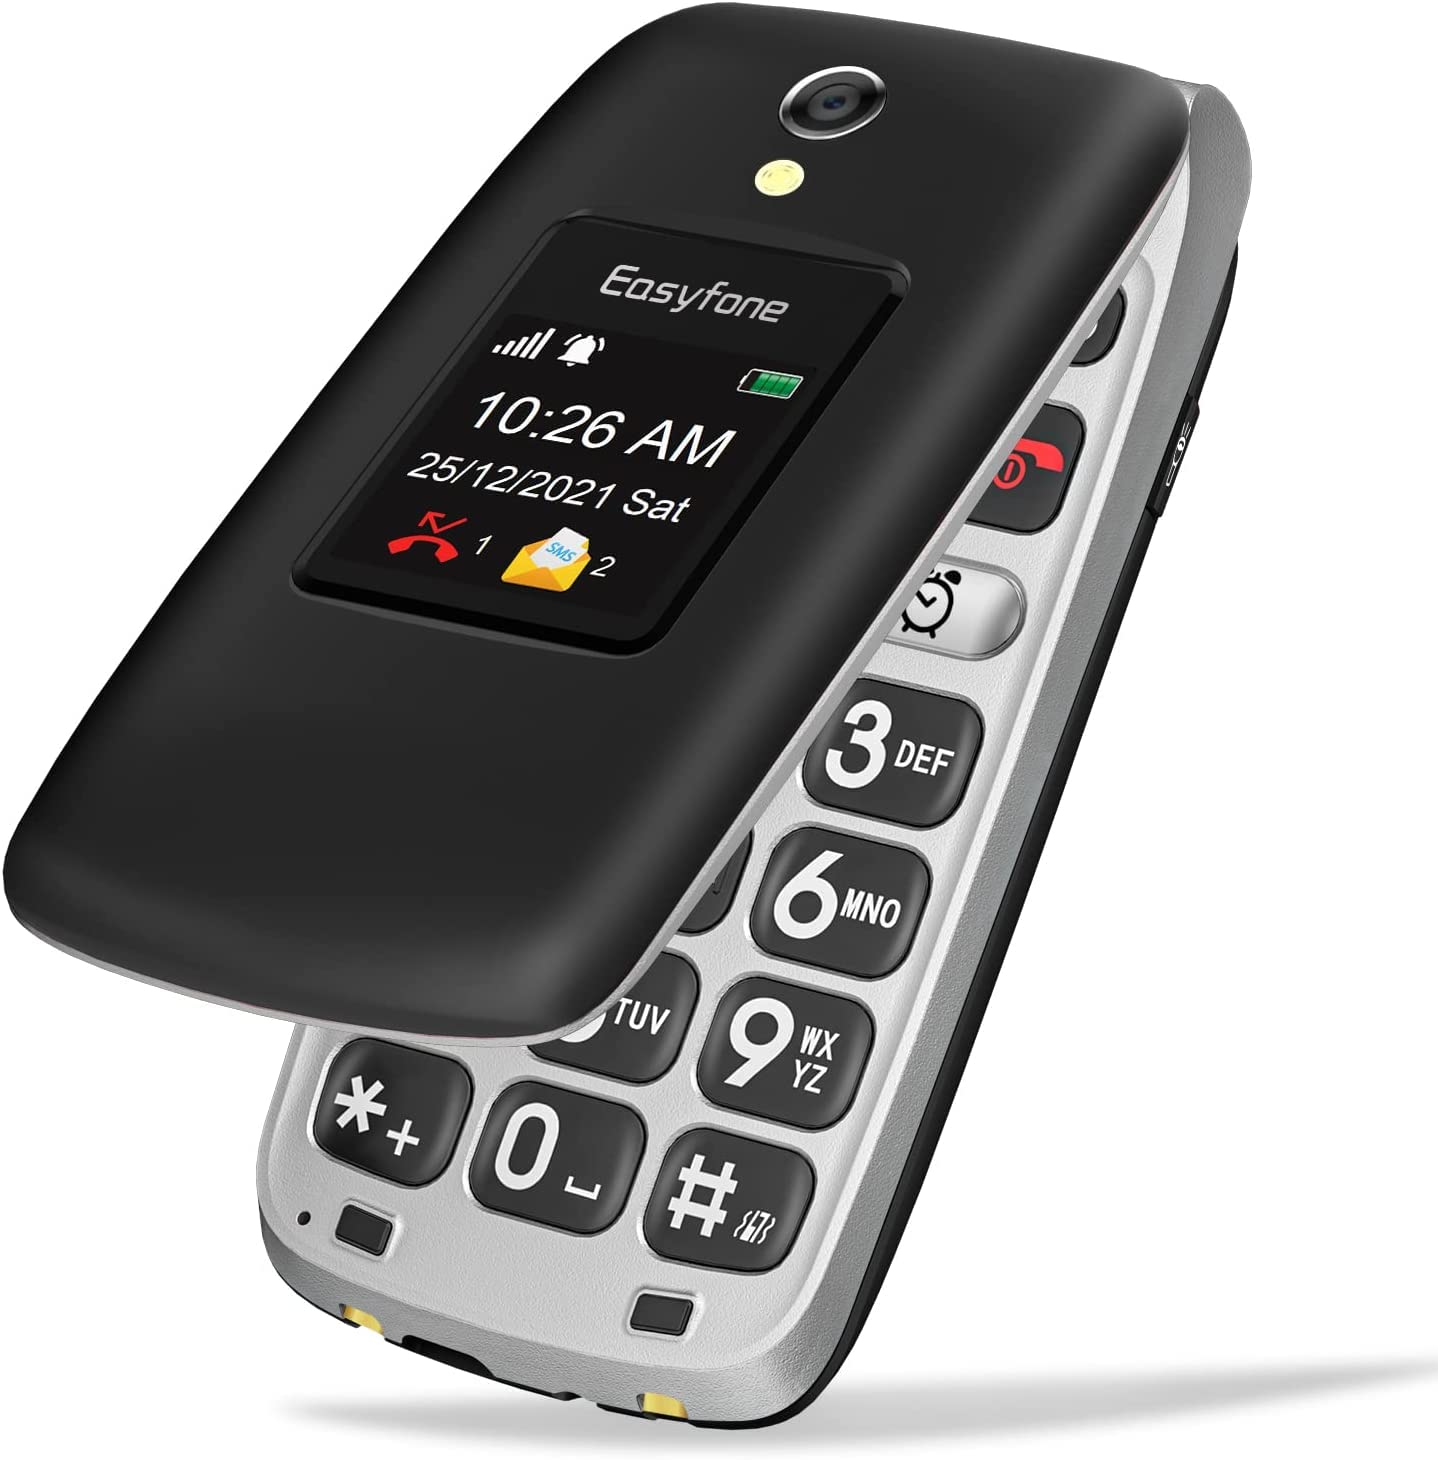 Easyfone Prime-A1 Pro 4G Big Button Flip Cell Phone for Seniors | Easy-to-Use | Clear Sound | SOS Button w/GPS | 1500mAh Battery Long Time Standby | Unlocked (T-Mobile &MVNOs) | Charging Dock (Black)